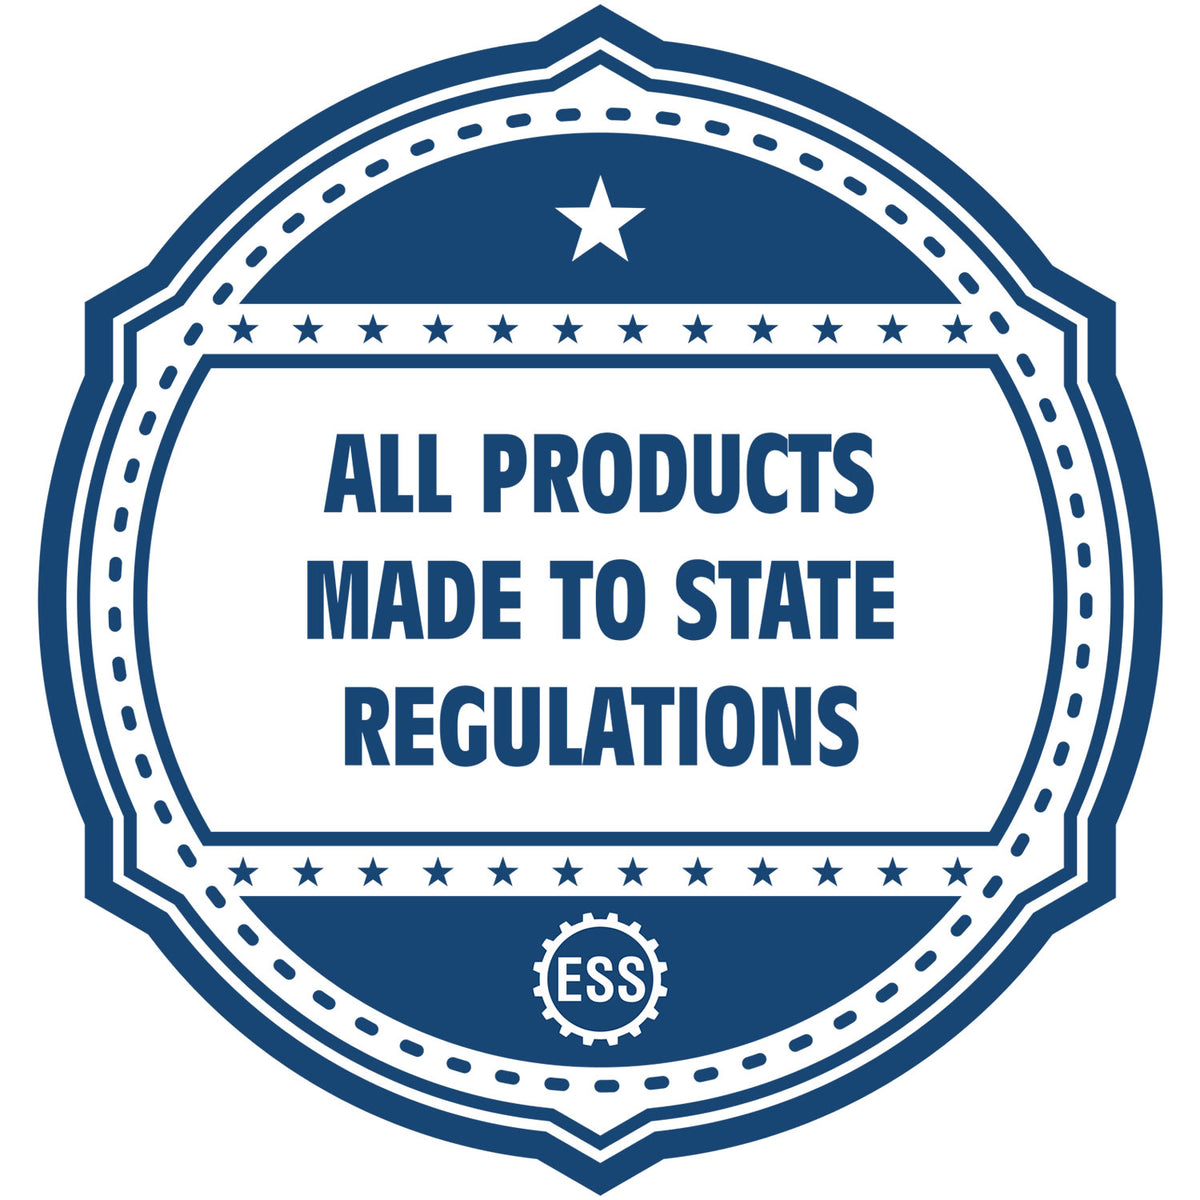 An icon or badge element for the MaxLight Premium Pre-Inked Rhode Island Rectangular Notarial Stamp showing that this product is made in compliance with state regulations.